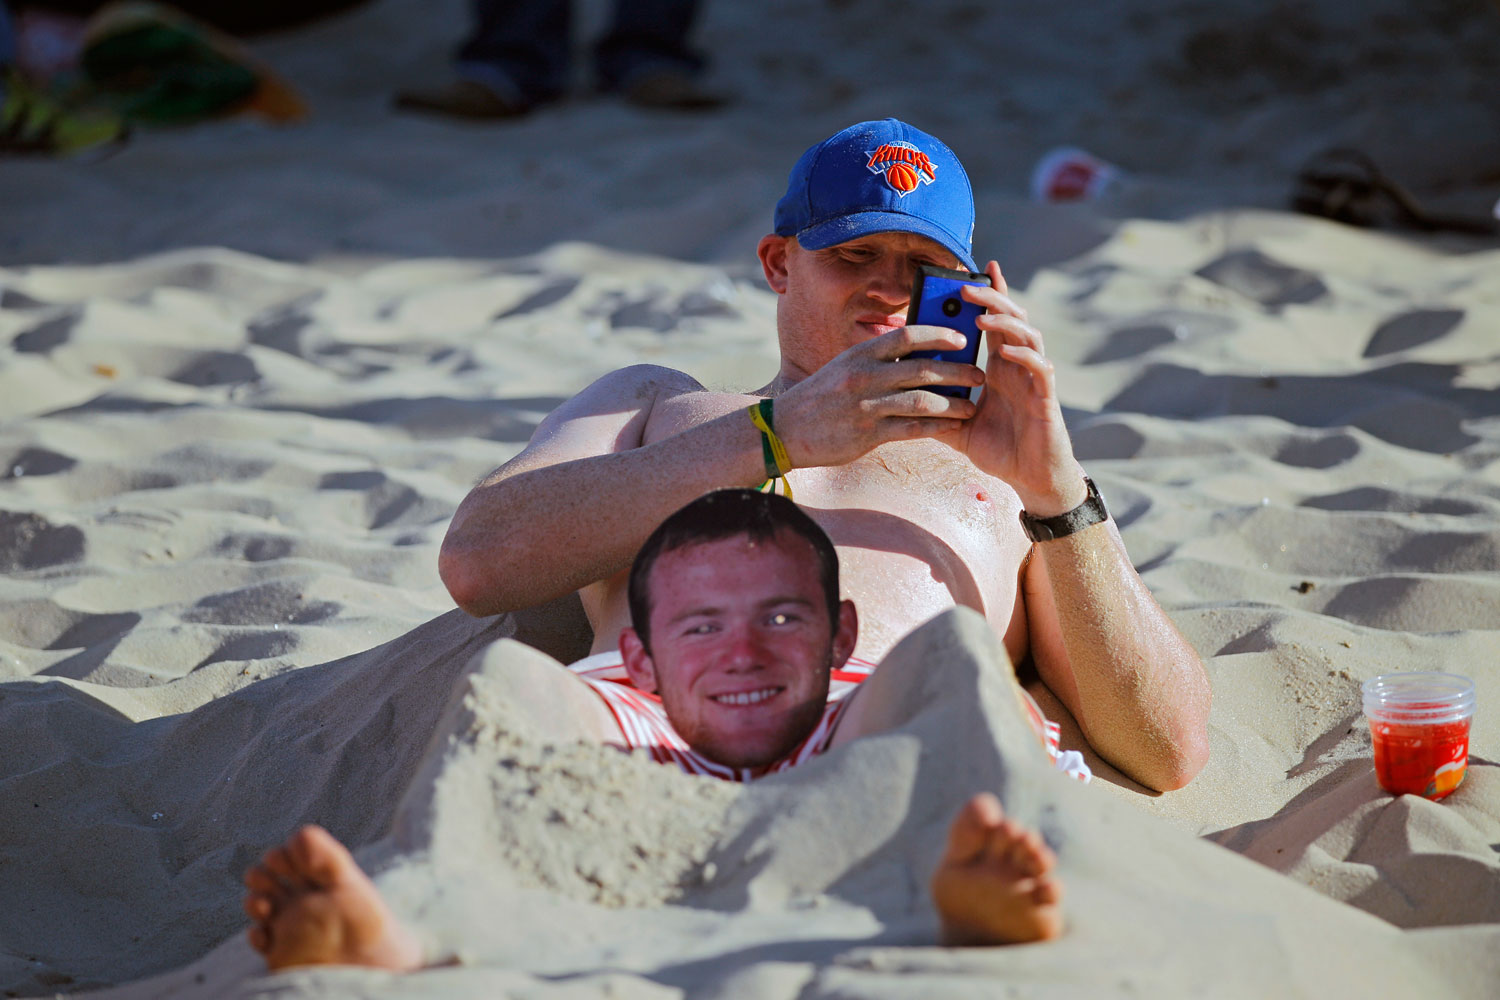 An England fan lies on the sand of Copacabana beach with a mask of English soccer star Wayne Rooney between his legs, in Rio de Janeiro on June 14, 2014.